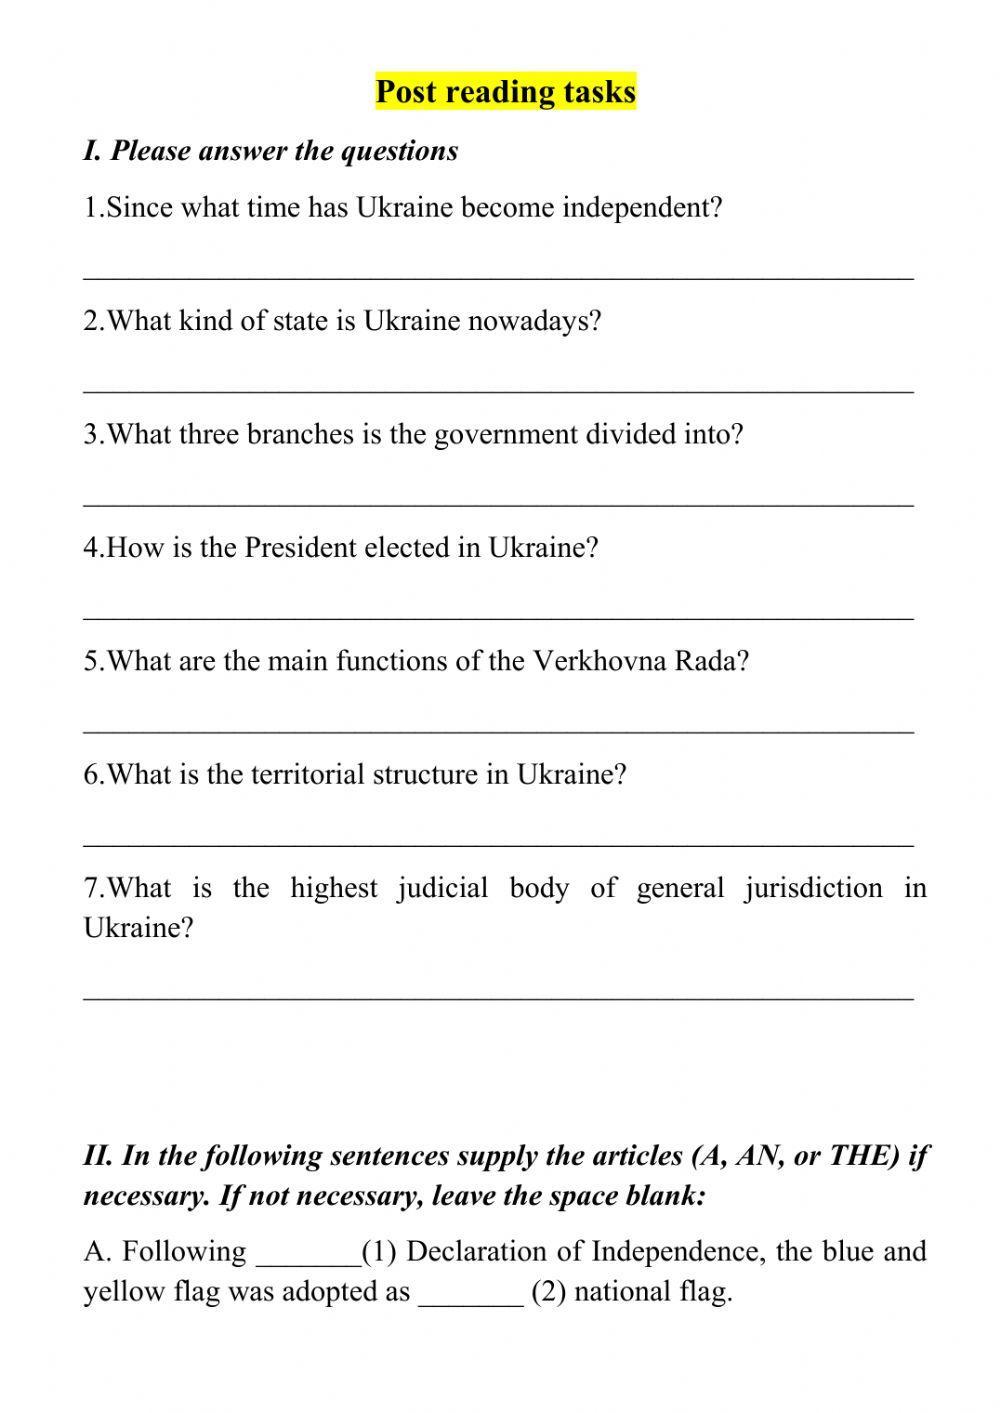 The political system of Ukraine